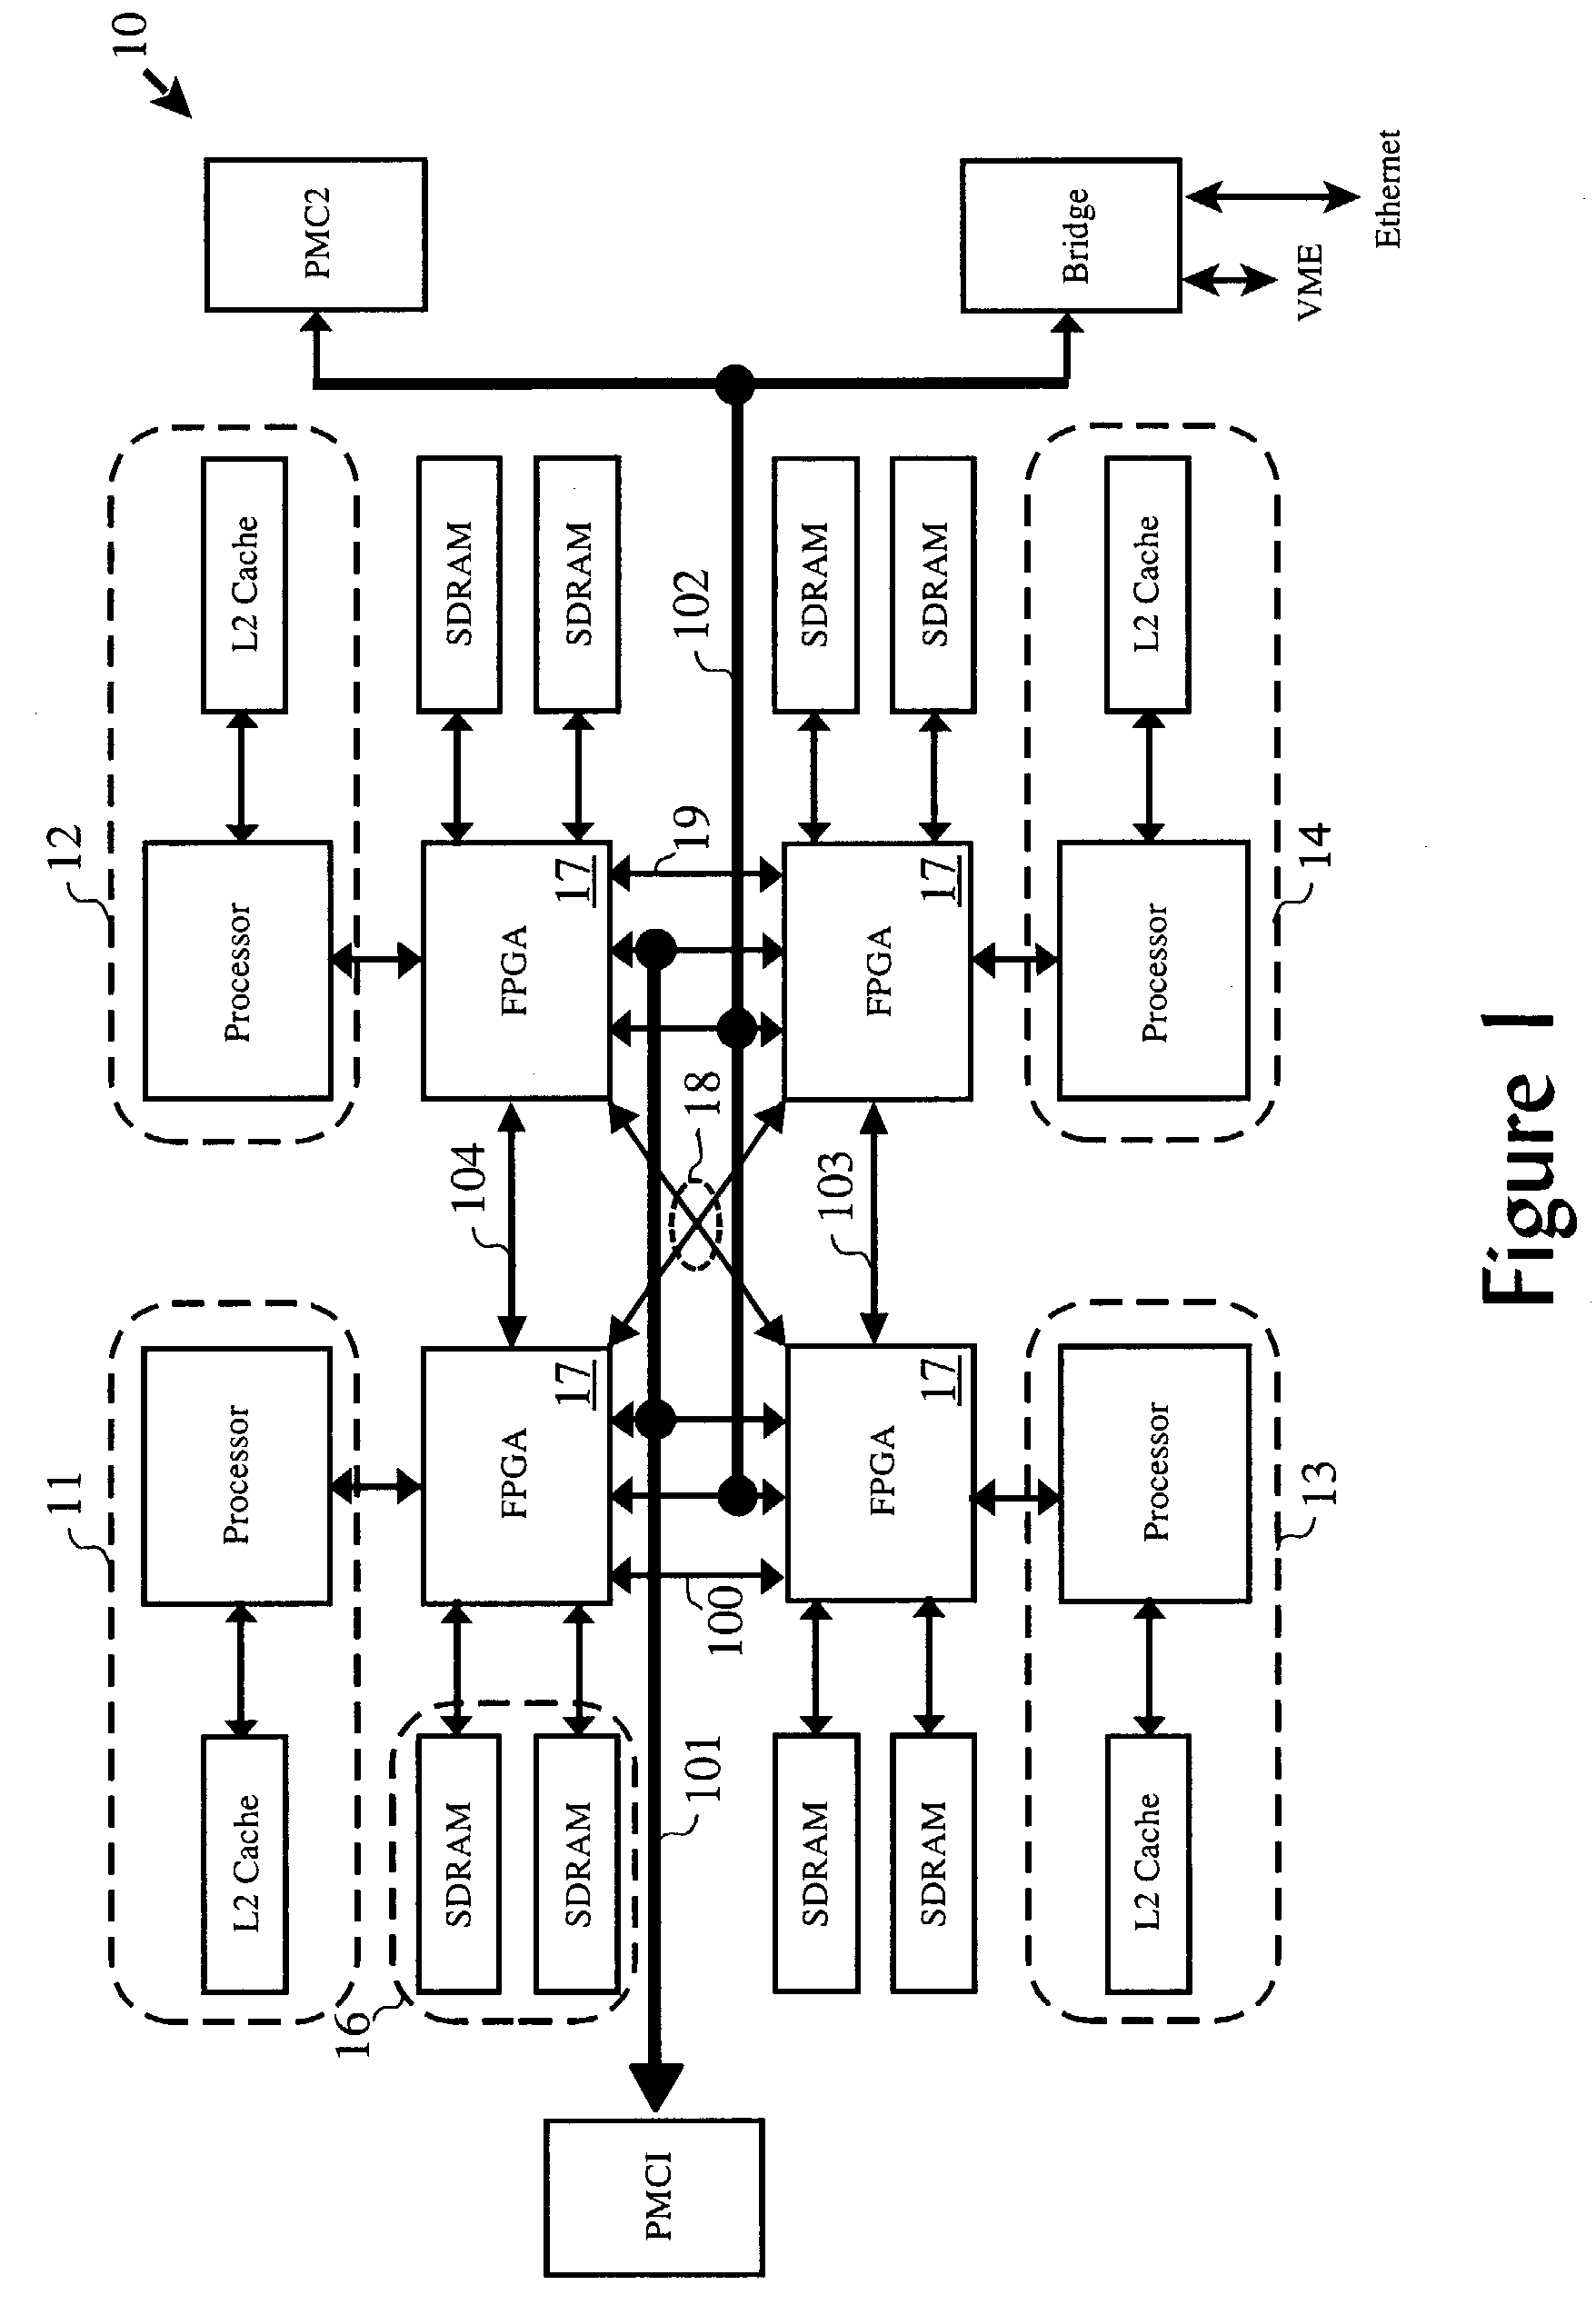 Autonomous signal processing resource for selective series processing of data in transit on communications paths in multi-processor arrangements